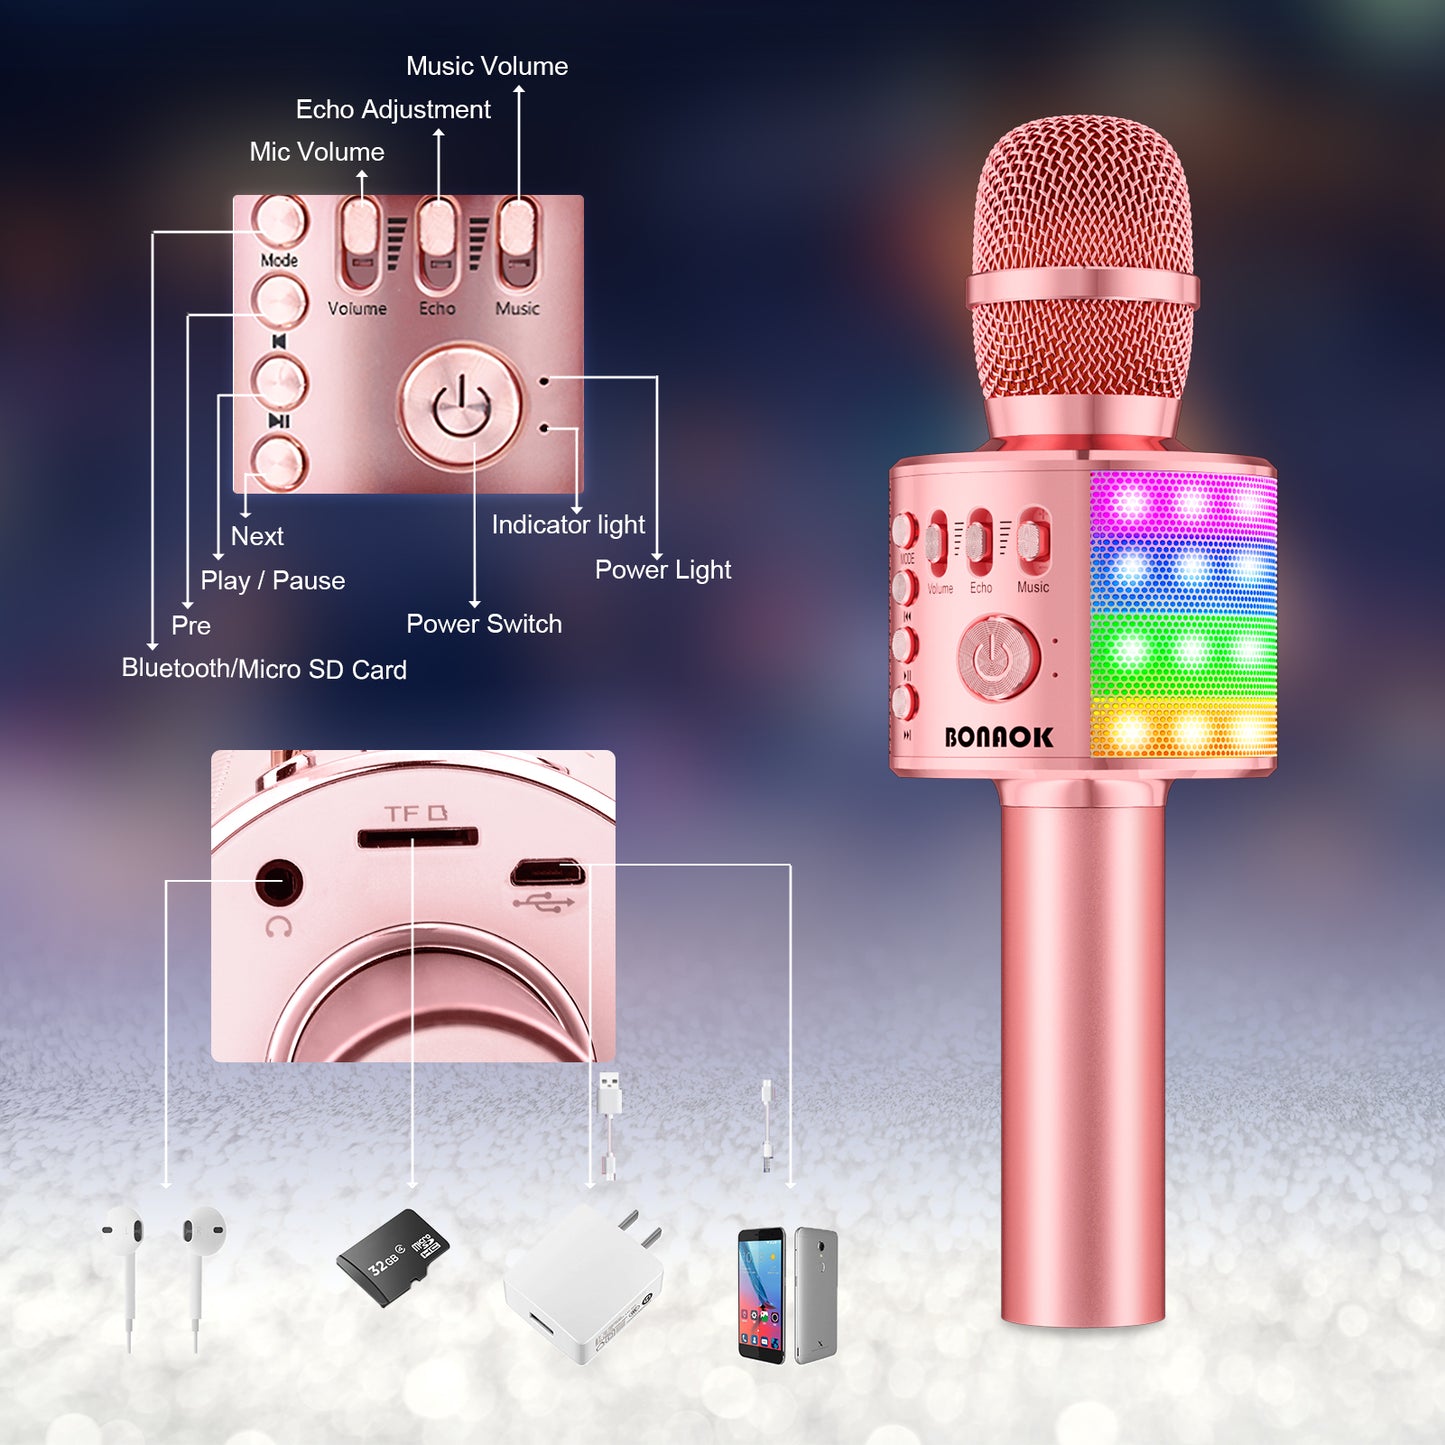 BONAOK Microphone for Kids Wireless Karaoke Toys, 4 in 1 Portable Bluetooth Singing Mic Speaker MP3 Player Great Gift for 4-12 Years Old Girls Boys Teens Adults All Ages Q37L (Champagne)